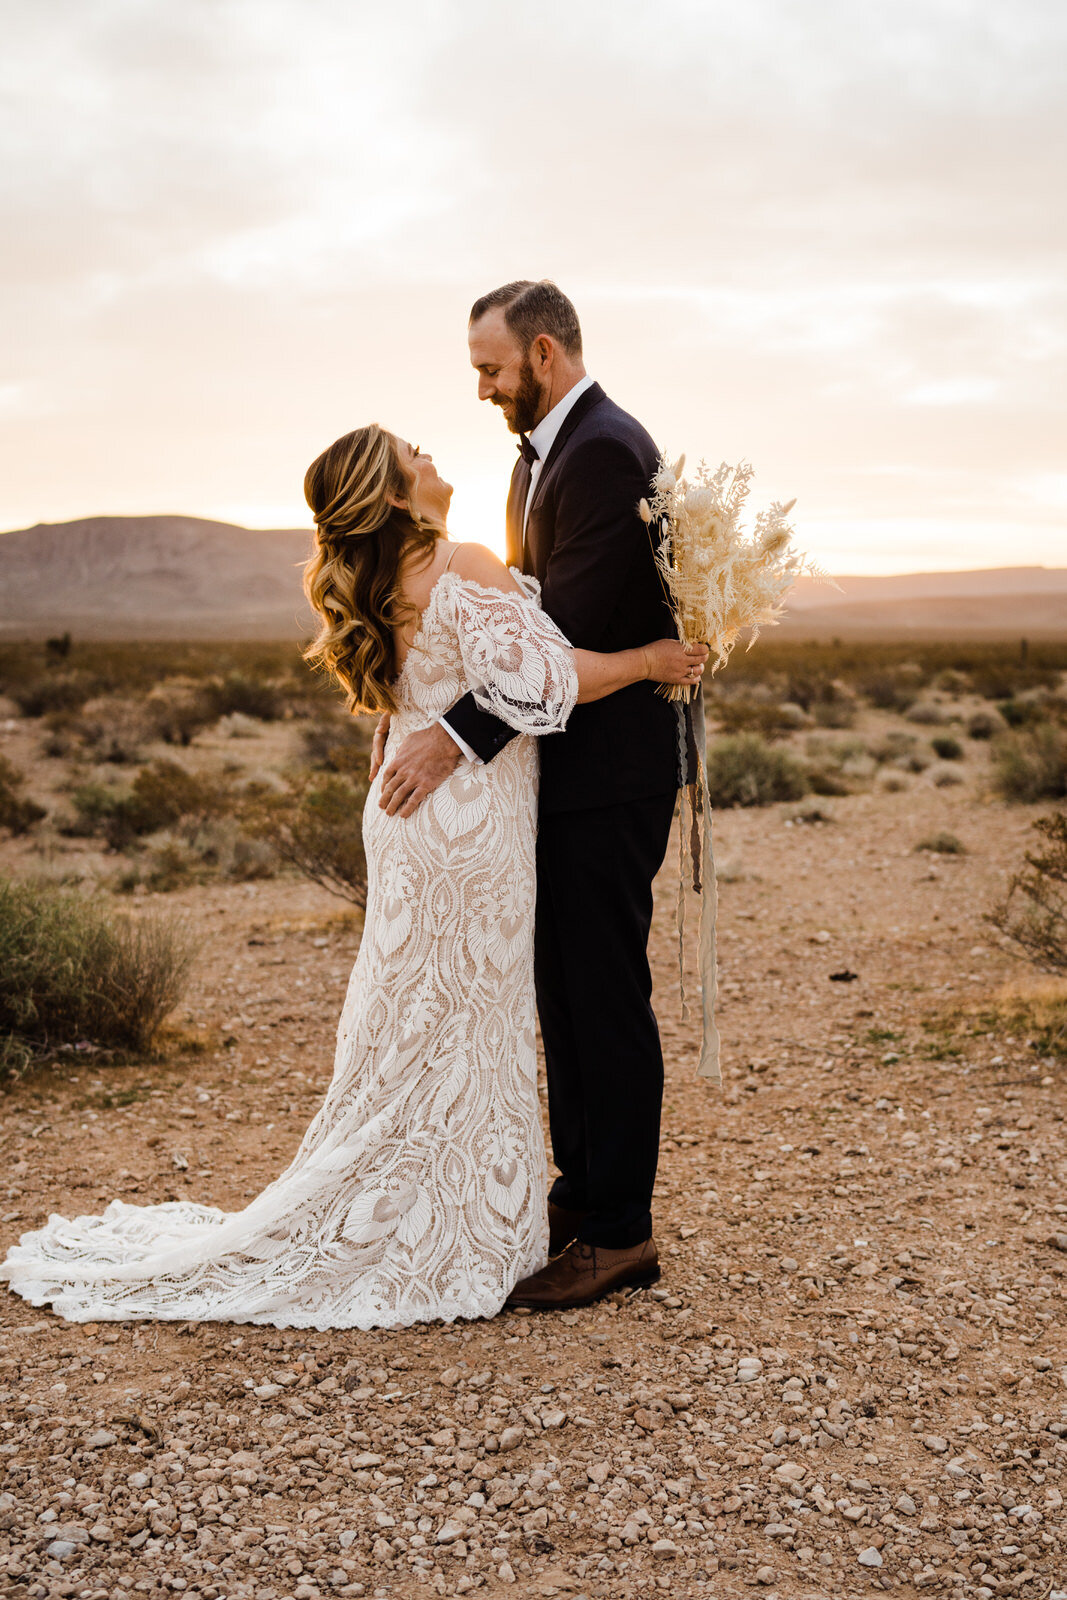 Seven Magic Mountains First Look with Boho Bride and Groom | Las Vegas Wedding Photographer | Las Vegas Elopement Photographer | Arizona Wedding Photographer | Kept Record | www.keptrecord.com